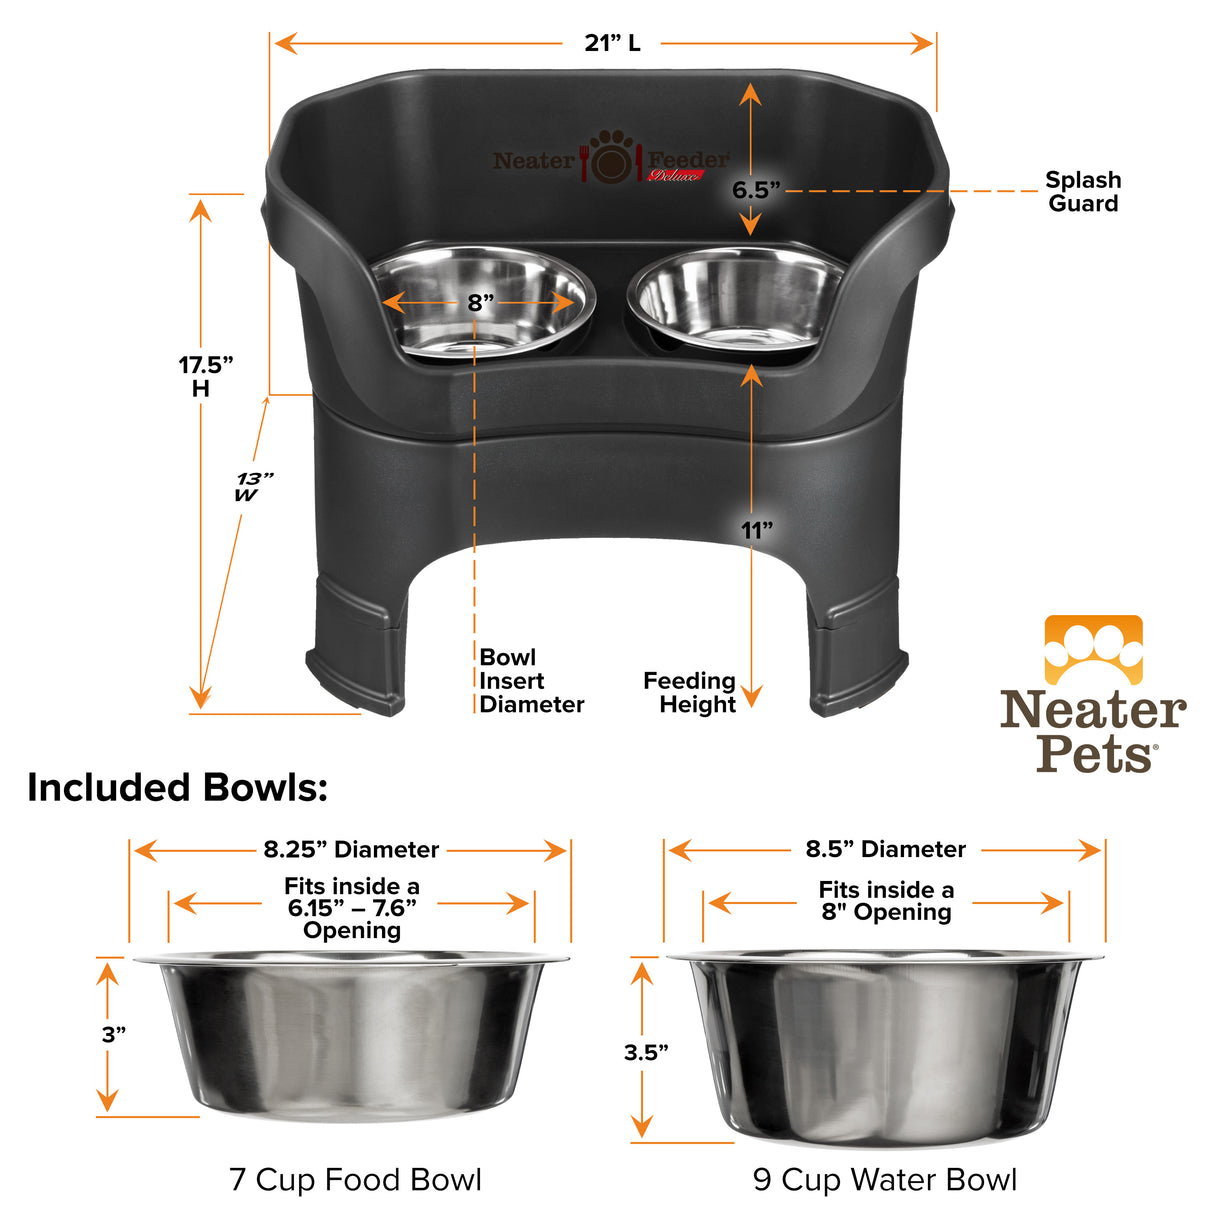 Deluxe Midnight Black Large Dog Neater Feeder with leg extensions and Bowl dimensions